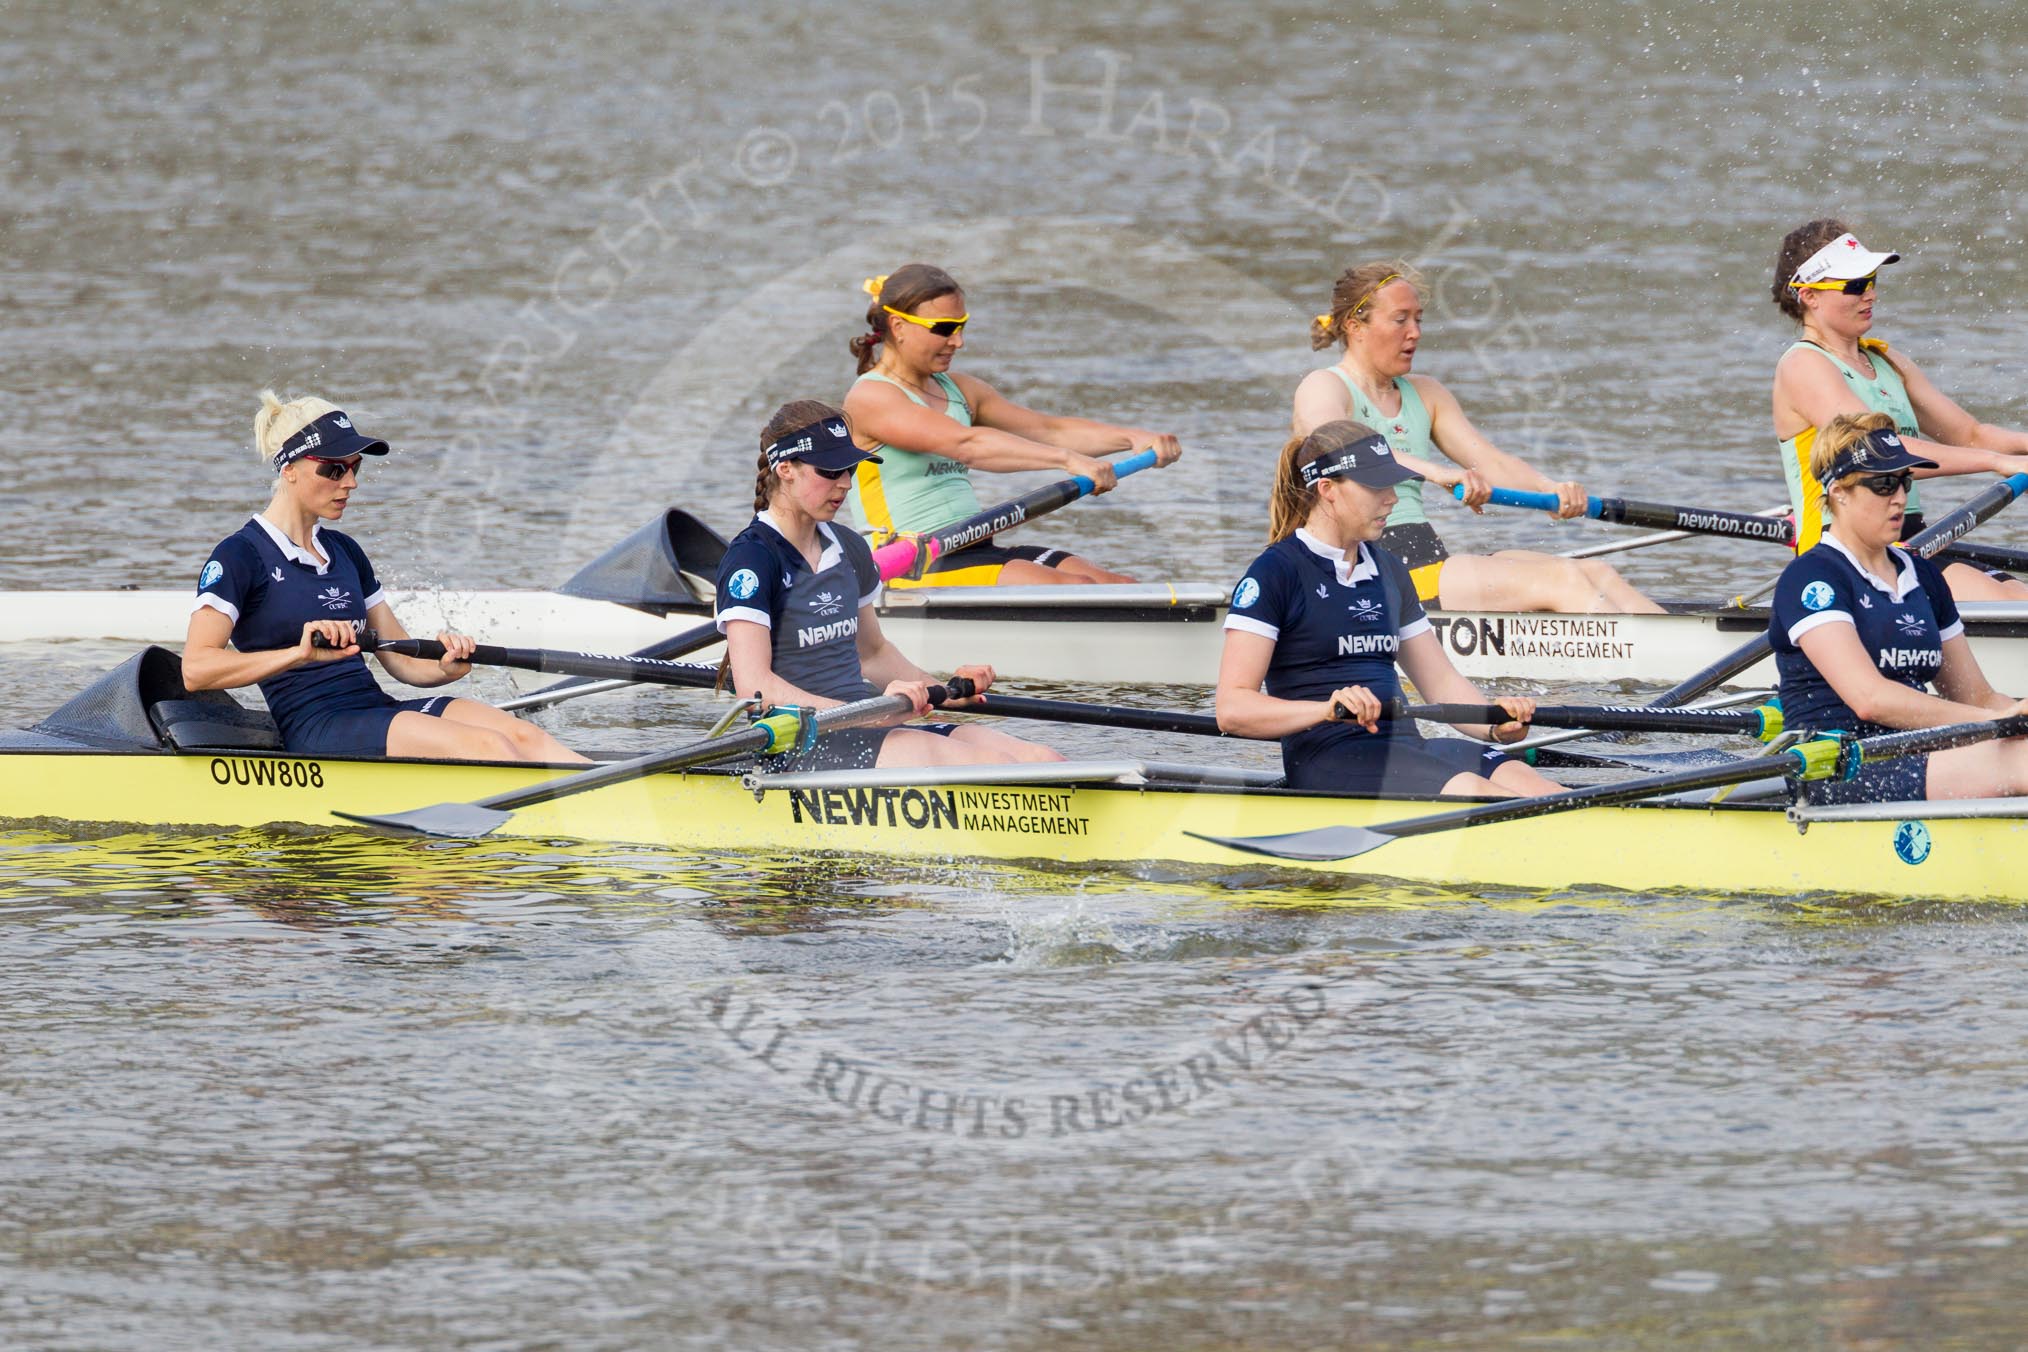 The Boat Race season 2015 - Newton Women's Boat Race.
River Thames between Putney and Mortlake,
London,

United Kingdom,
on 10 April 2015 at 16:03, image #122